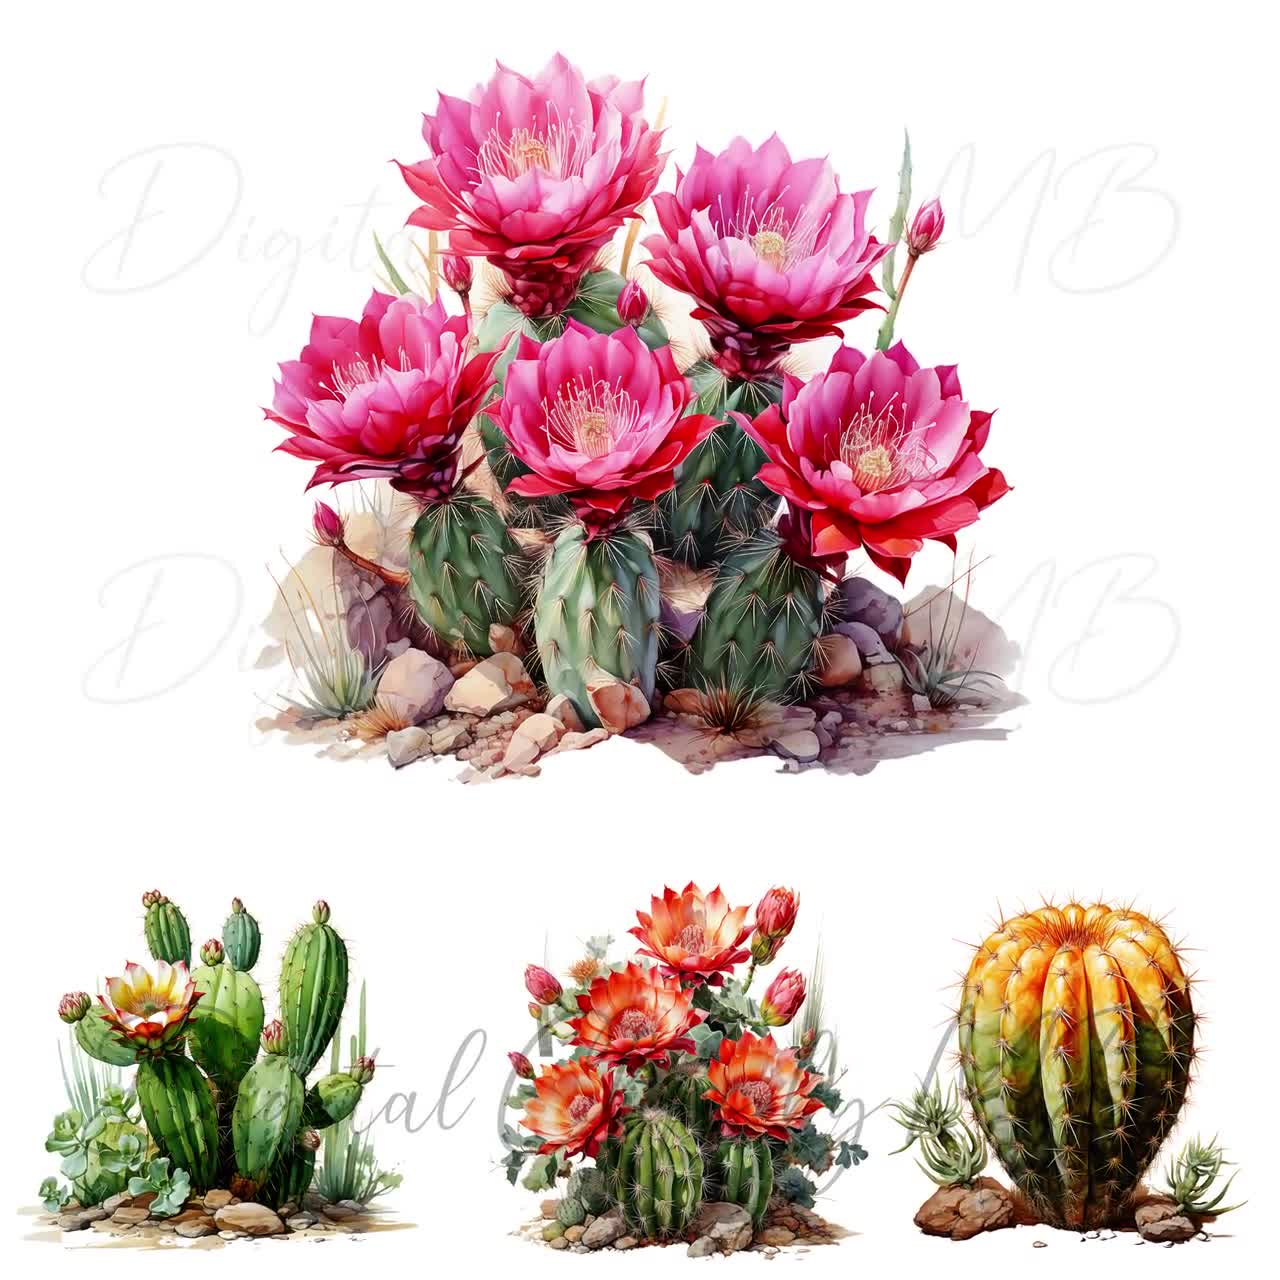 Cactus png graphic clipart design 19152625 PNG